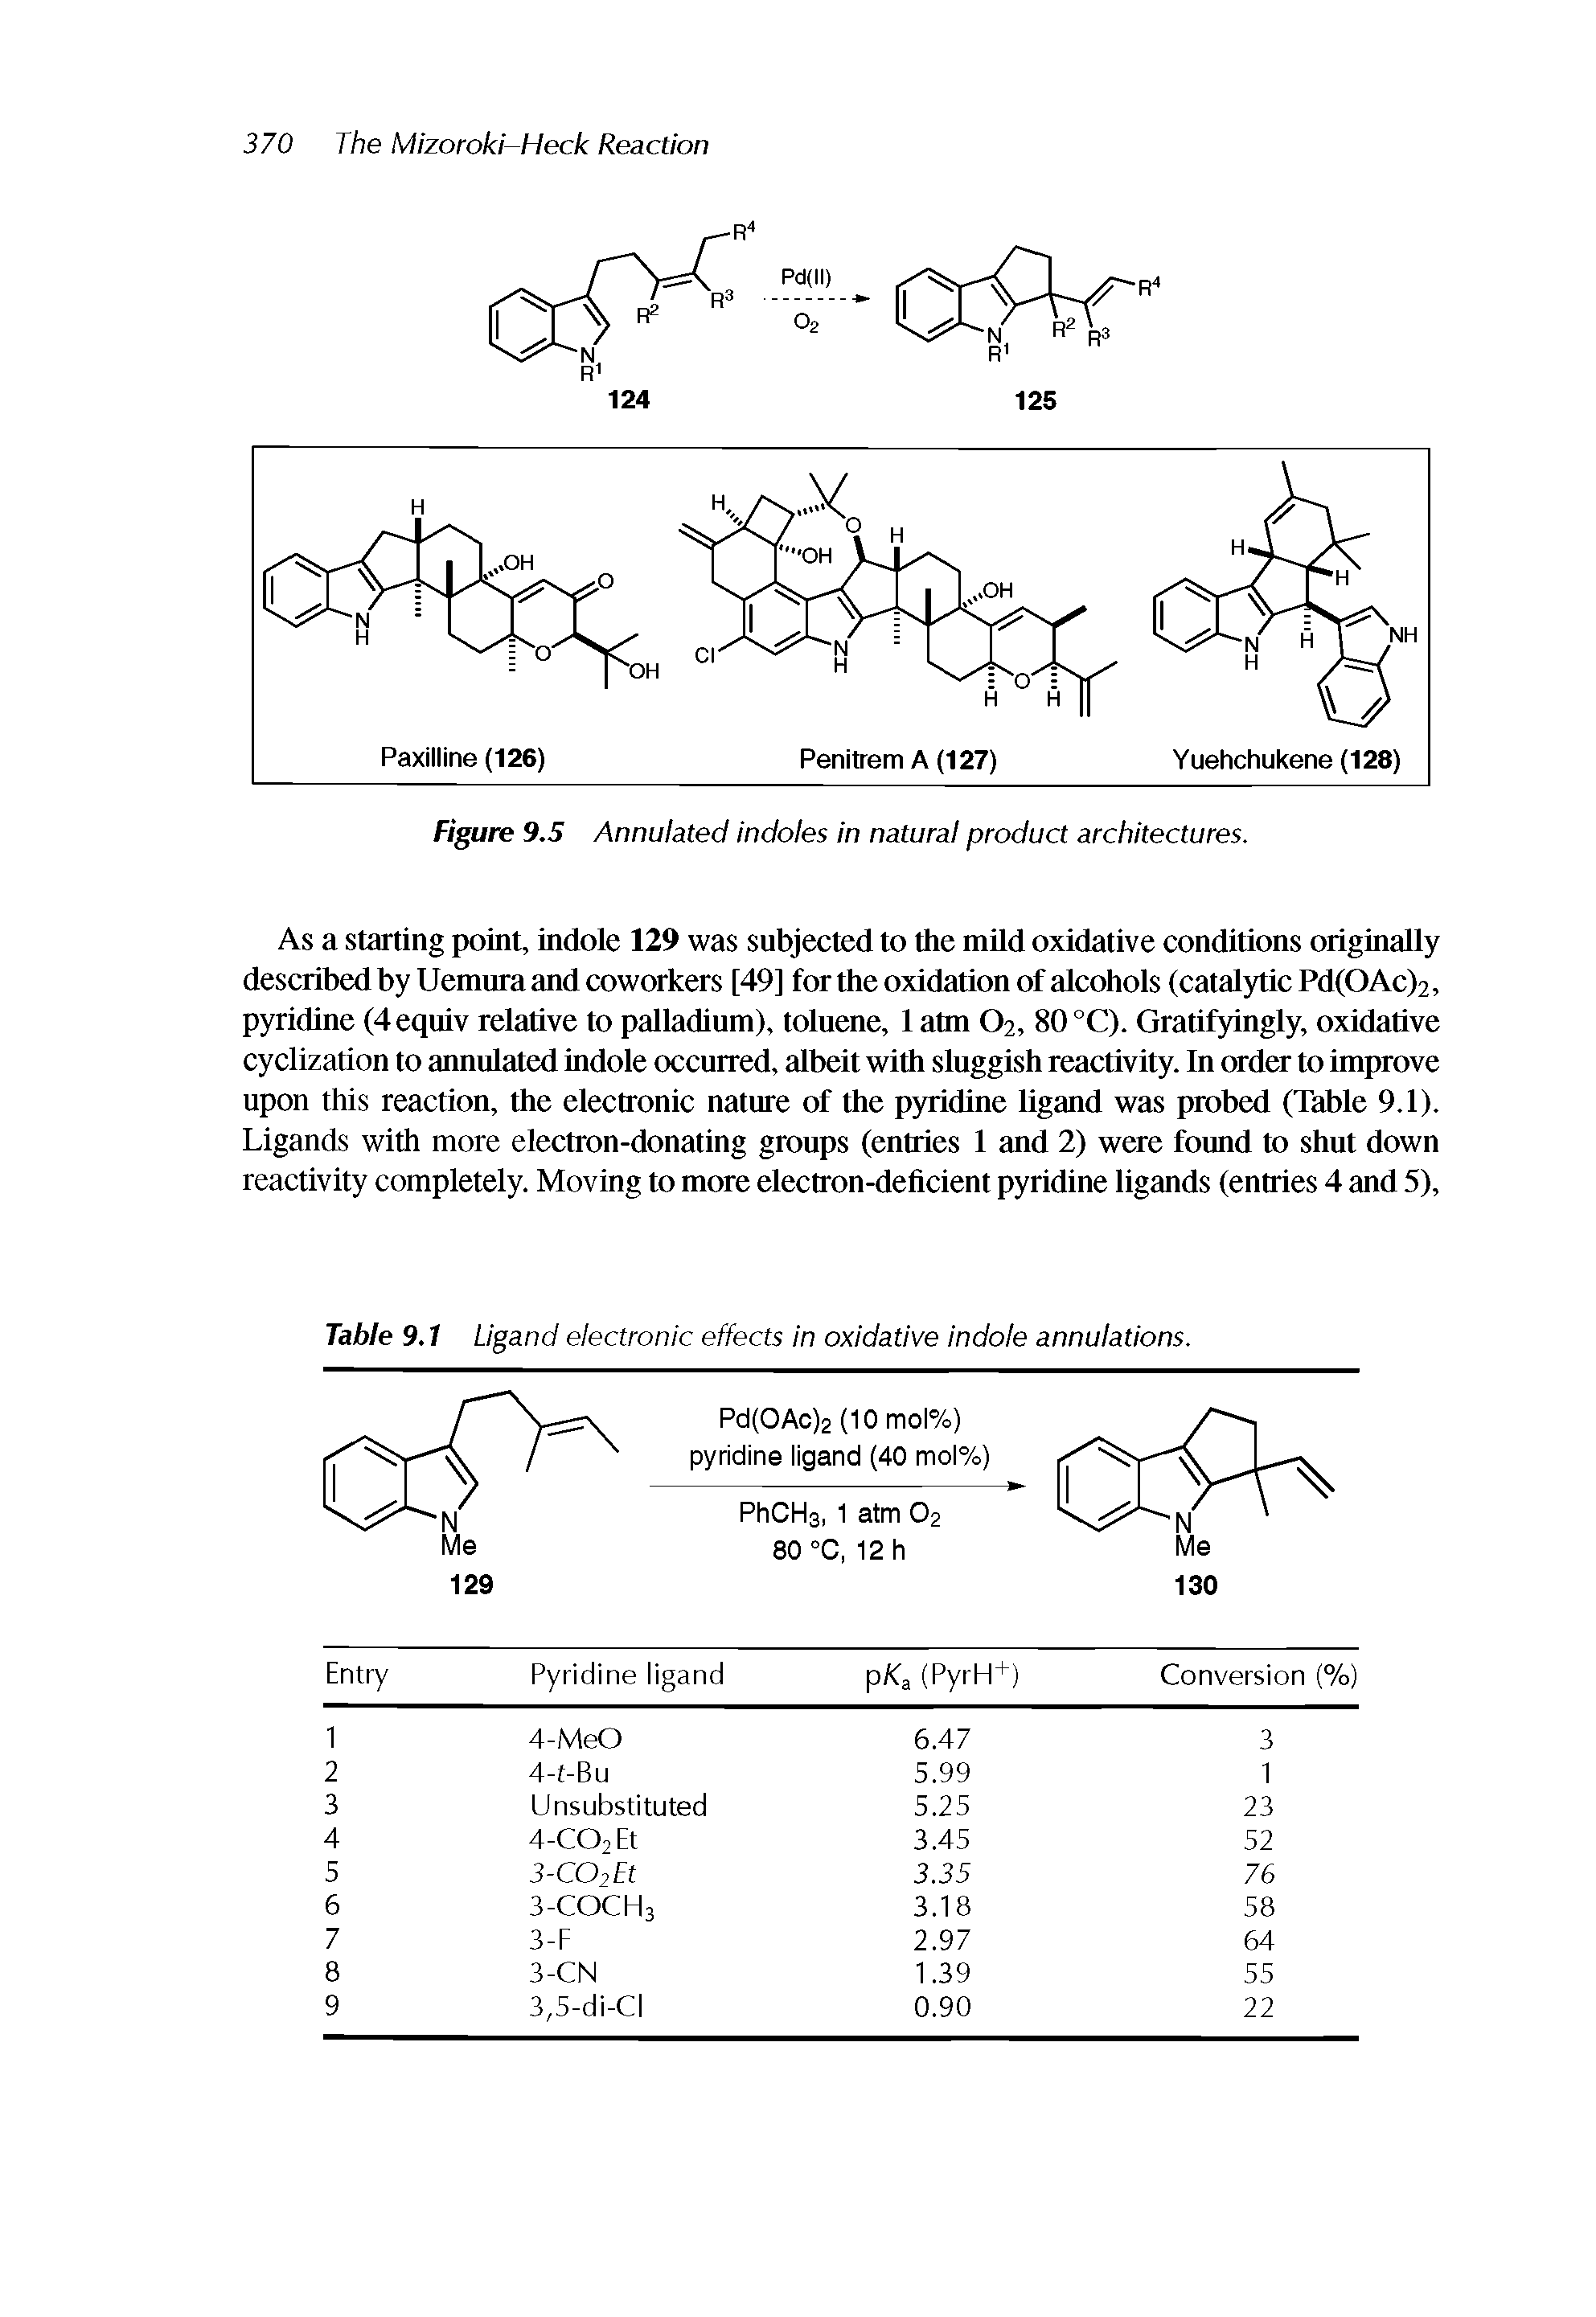 Table 9.1 Ligand electronic effects in oxidative indole annulations.